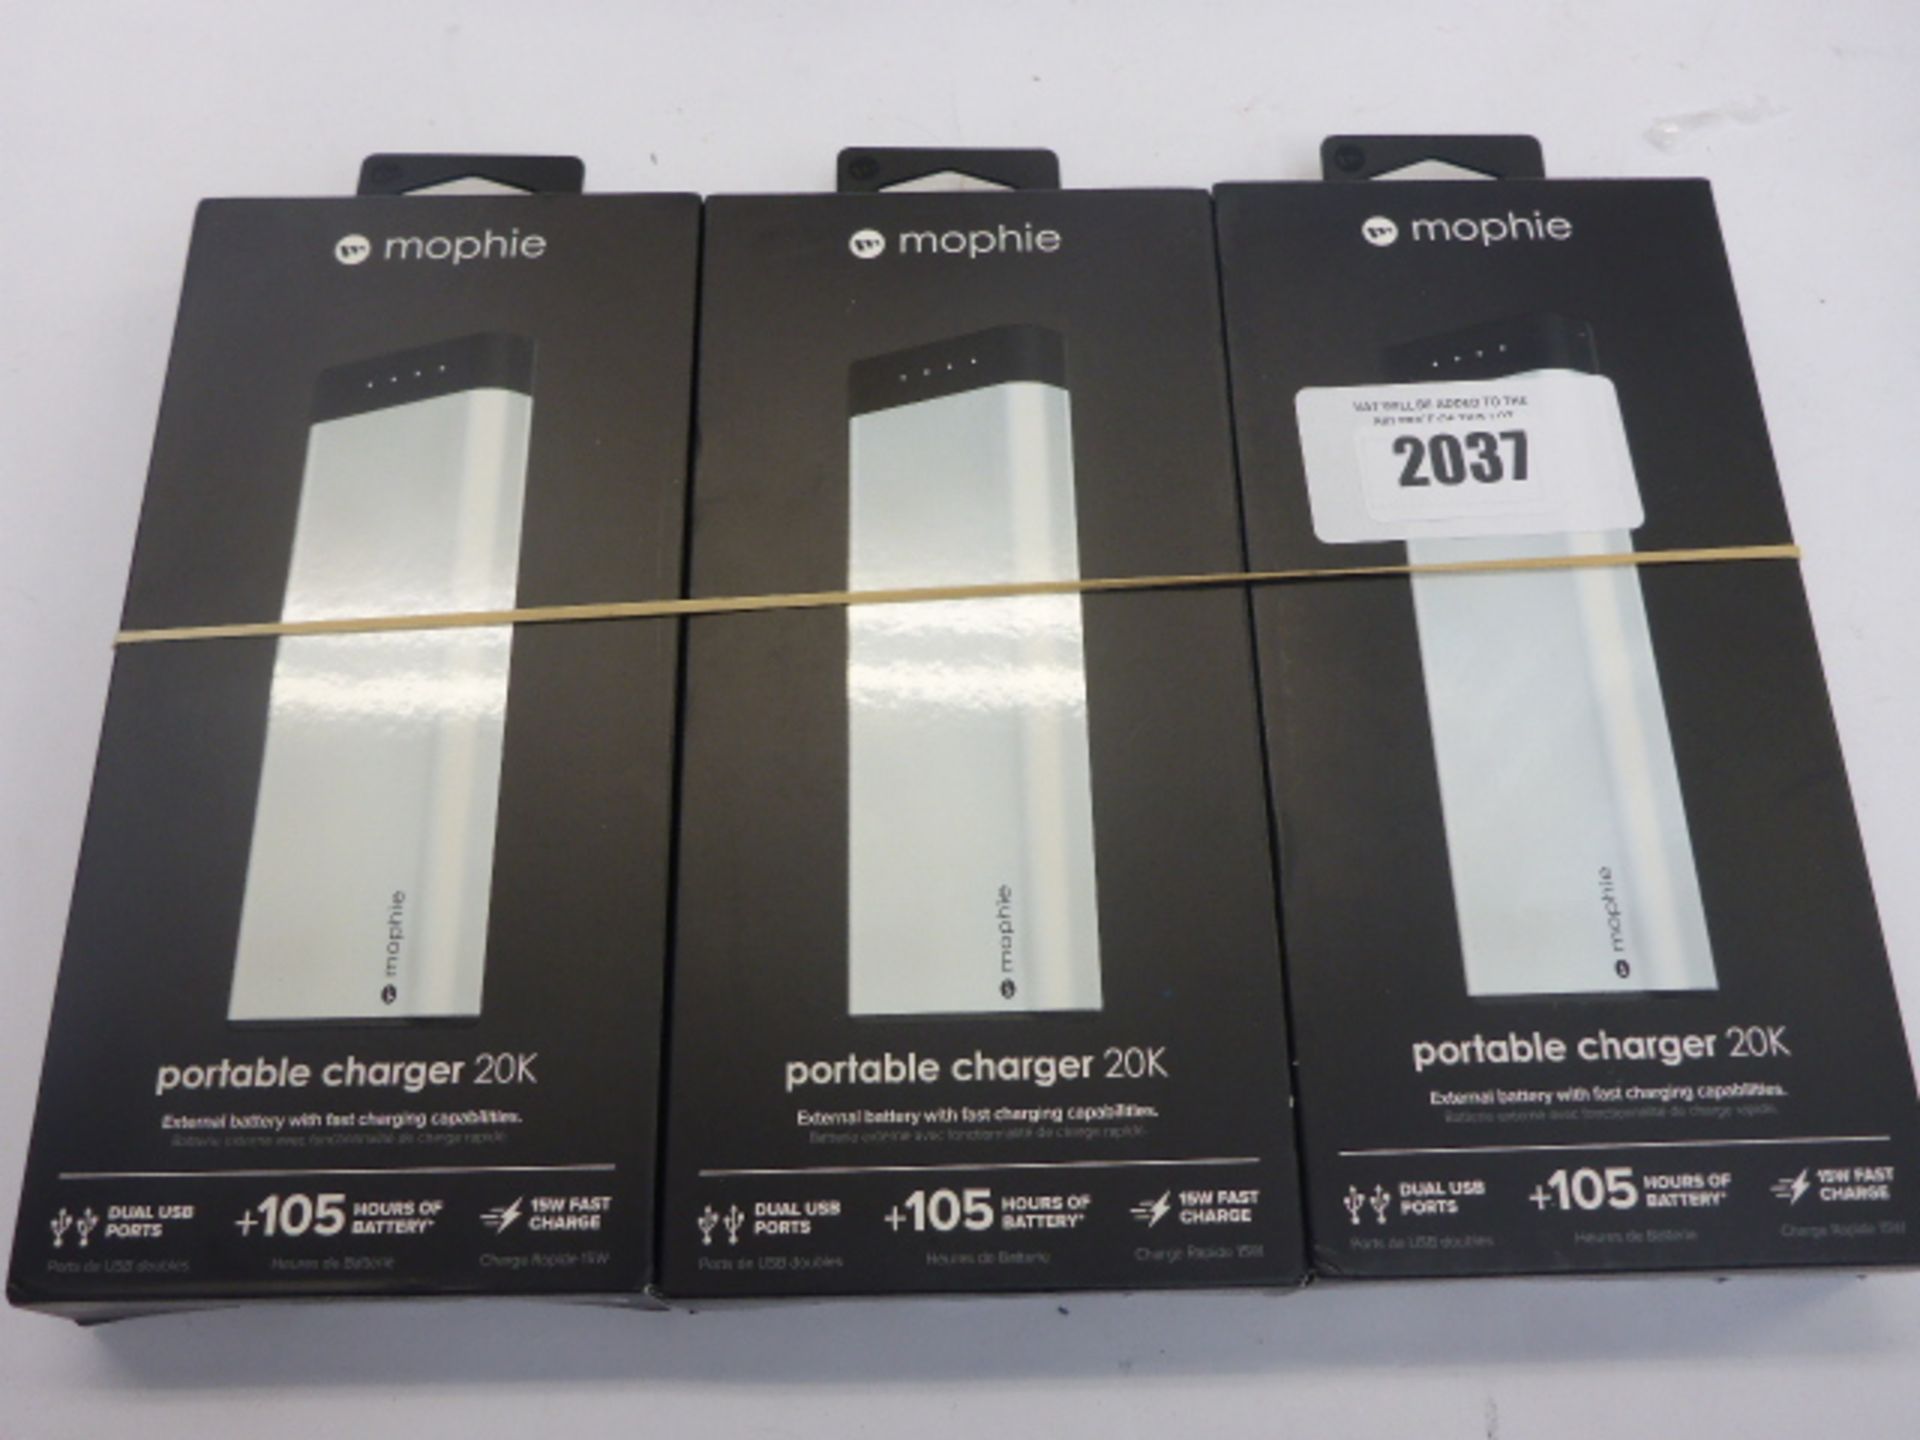 3x Mophie Portable Charger 20K